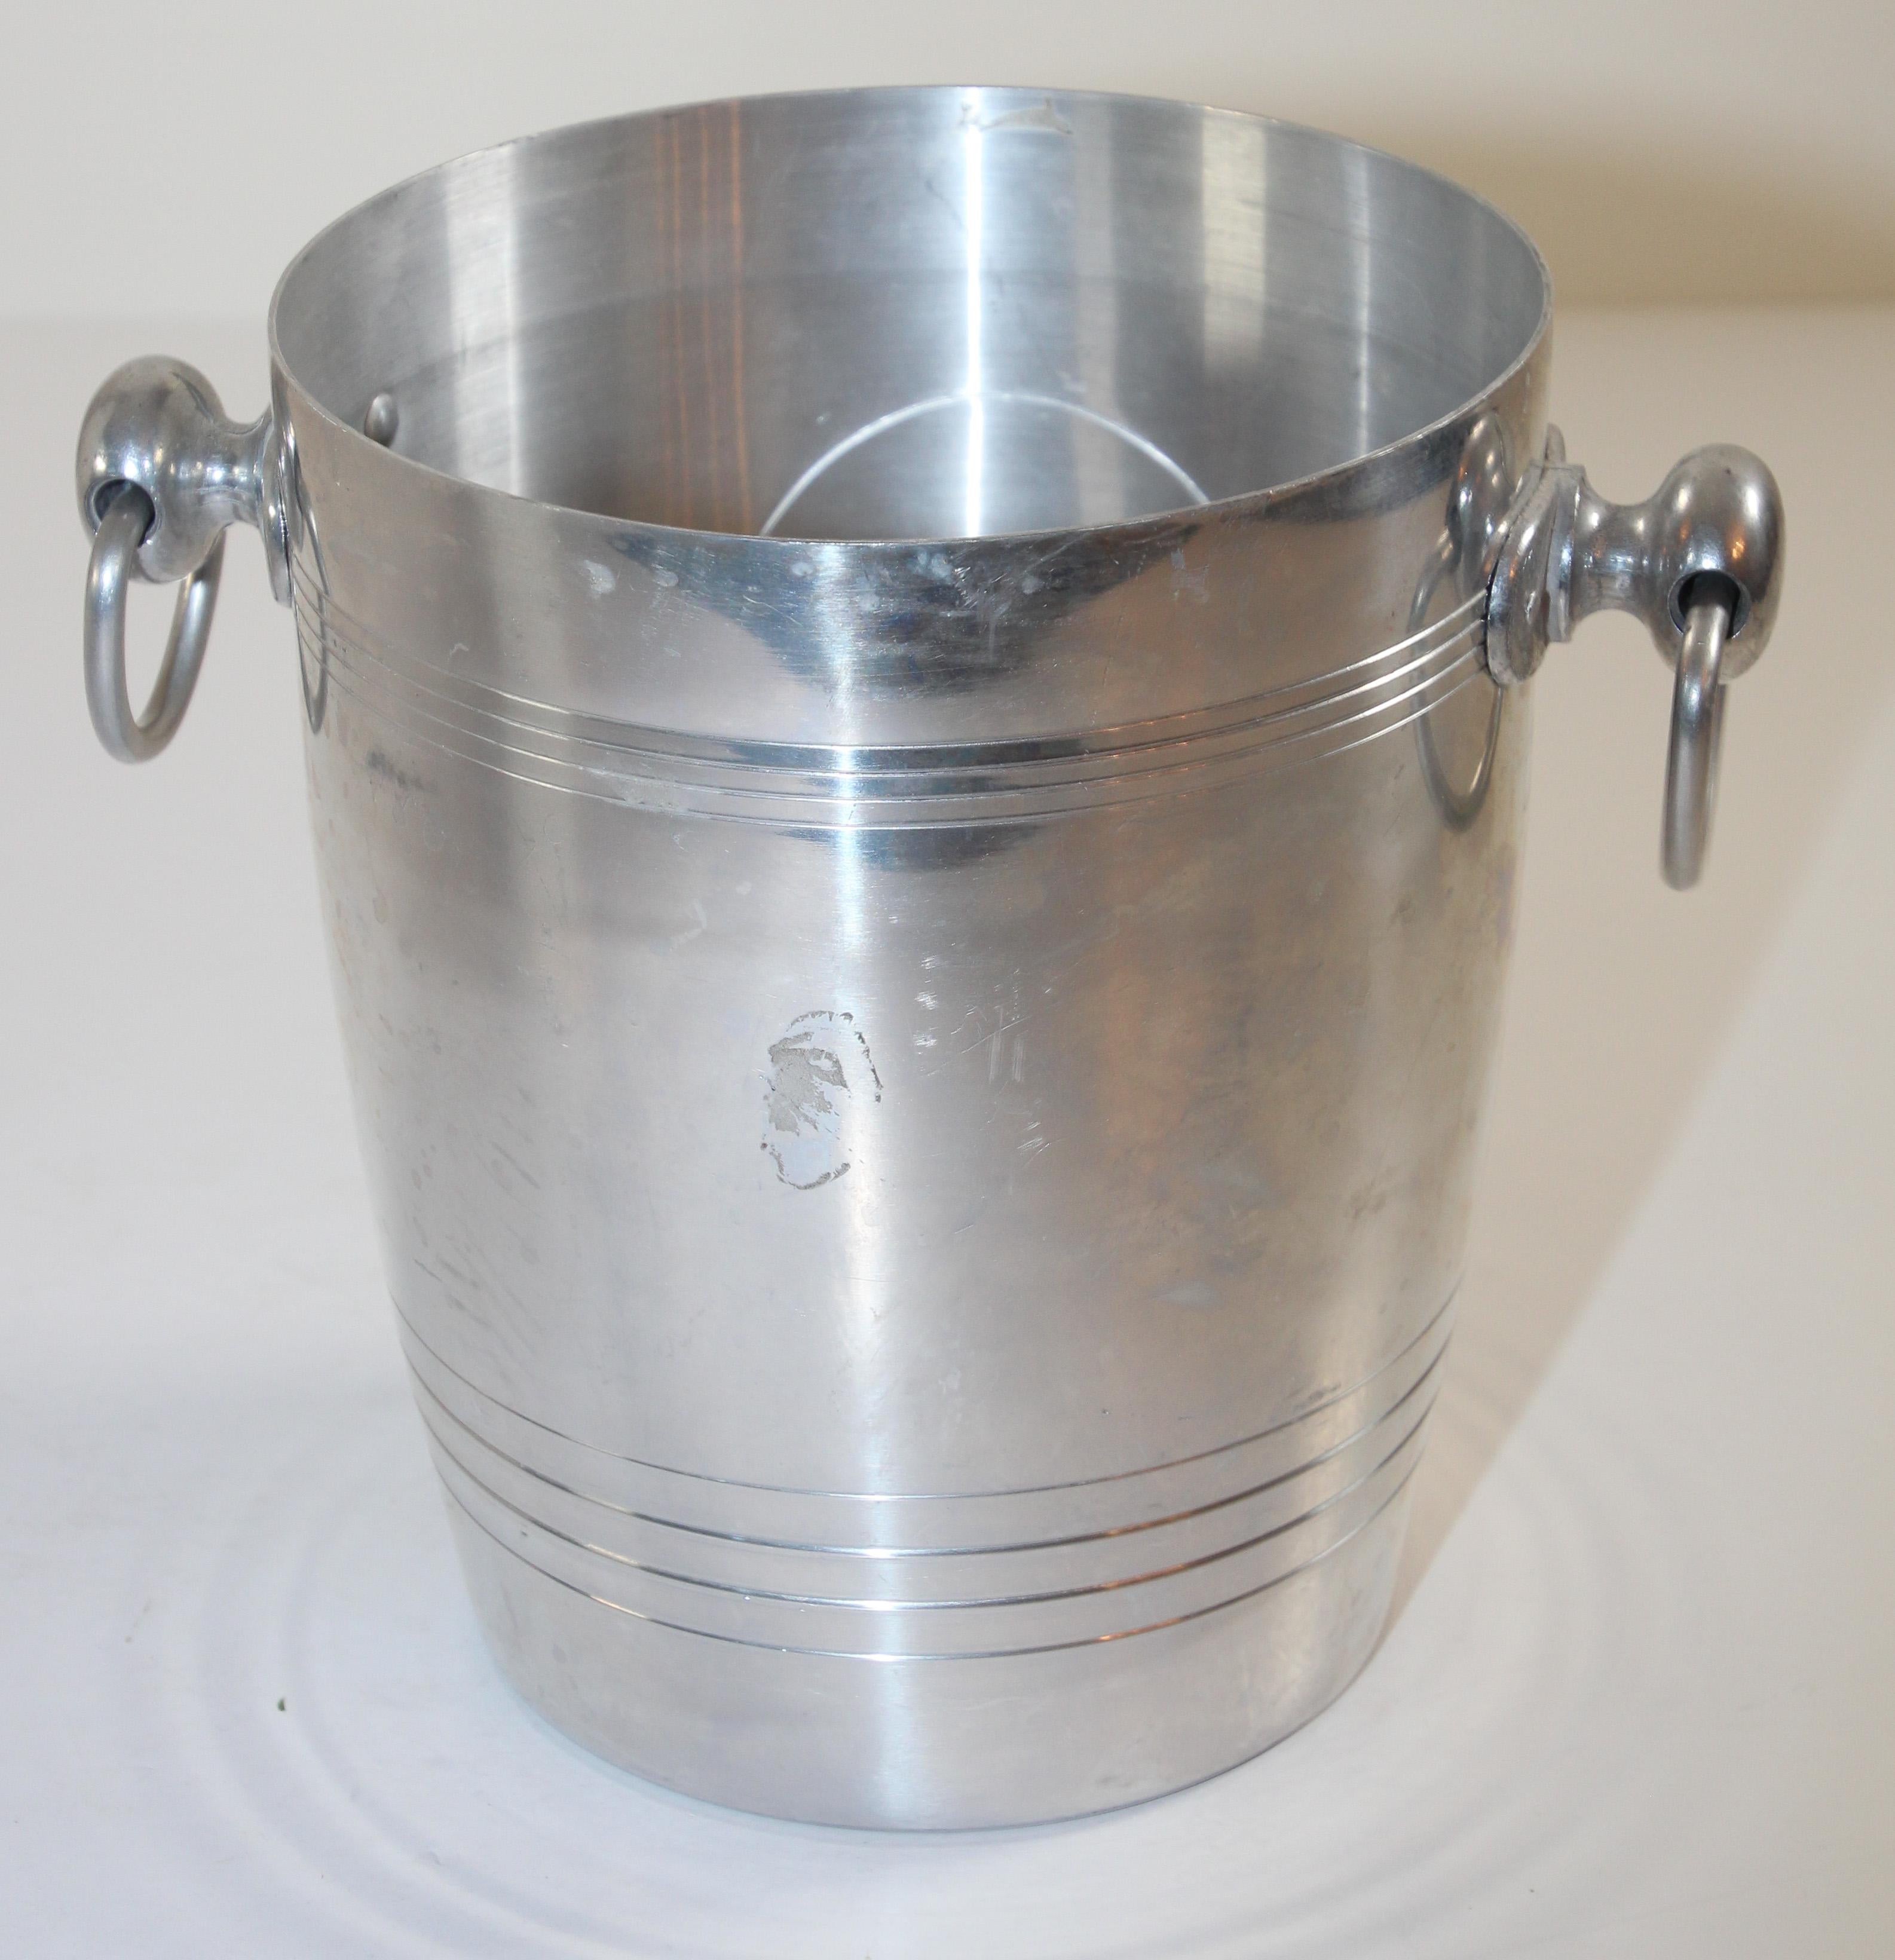 Mid-20th Century French Vintage Domaine Chandon Champagne Ice Bucket Cooler